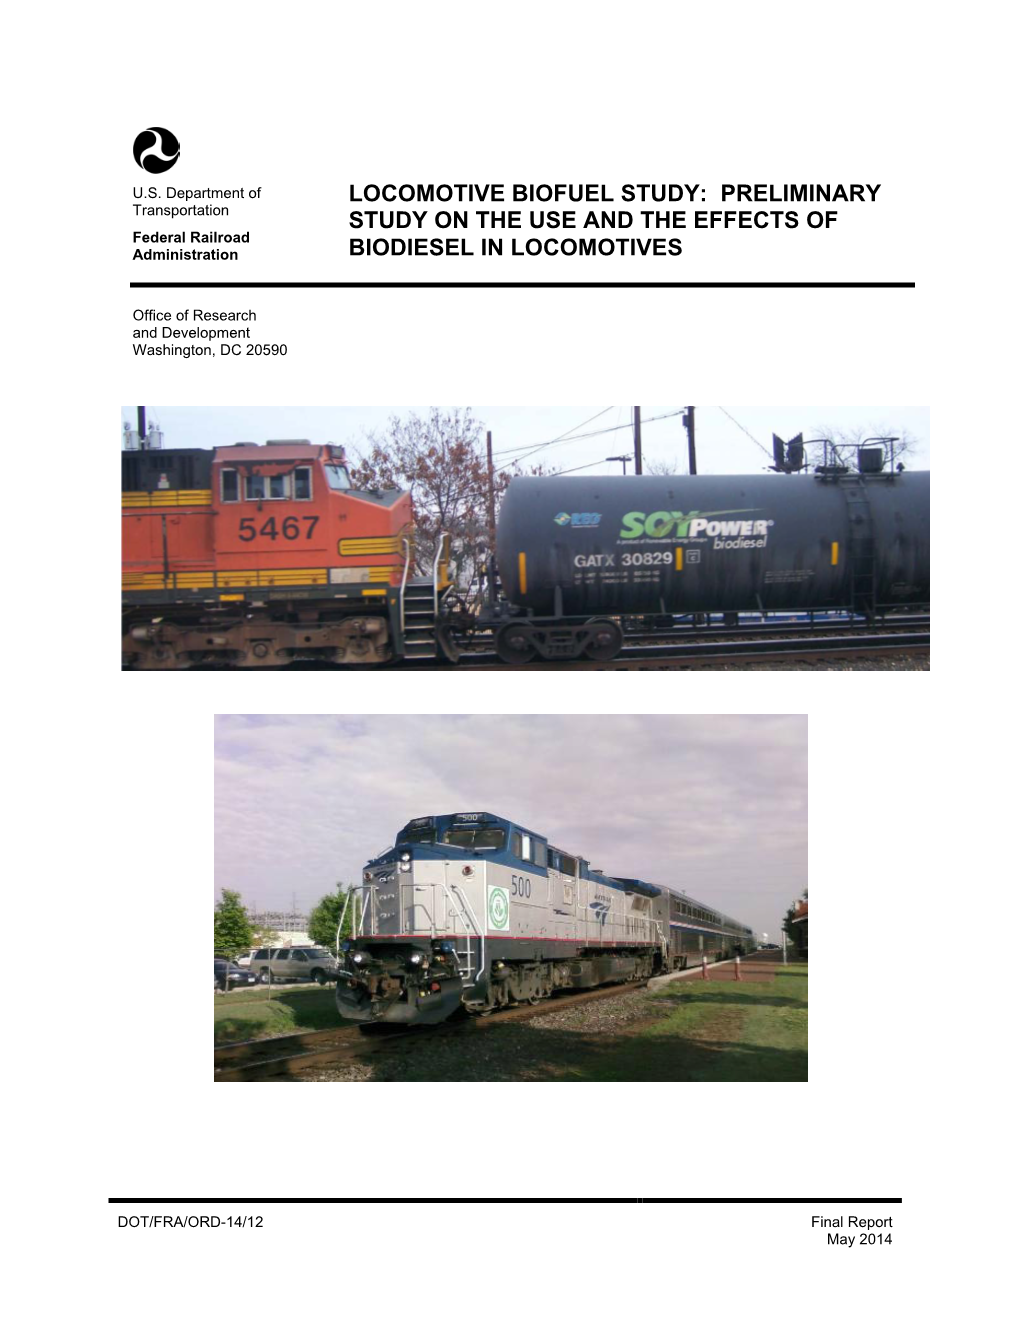 Preliminary Study on the Use and the Effects of Biodiesel in Locomotives